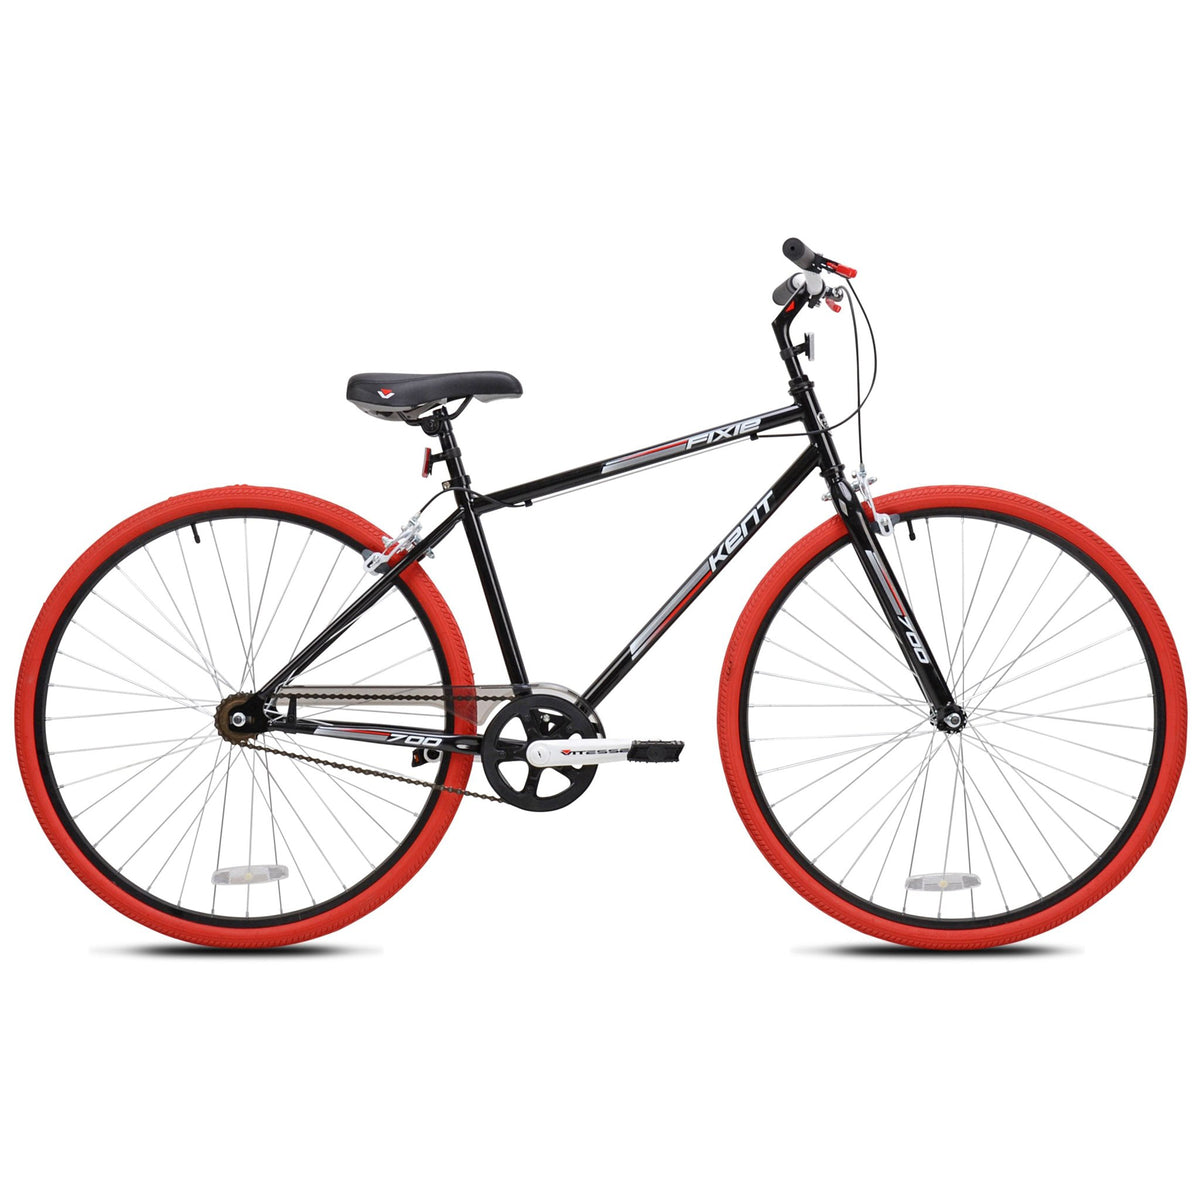 700c Kent Fixie | Hybrid Bike for Adults Ages 14+